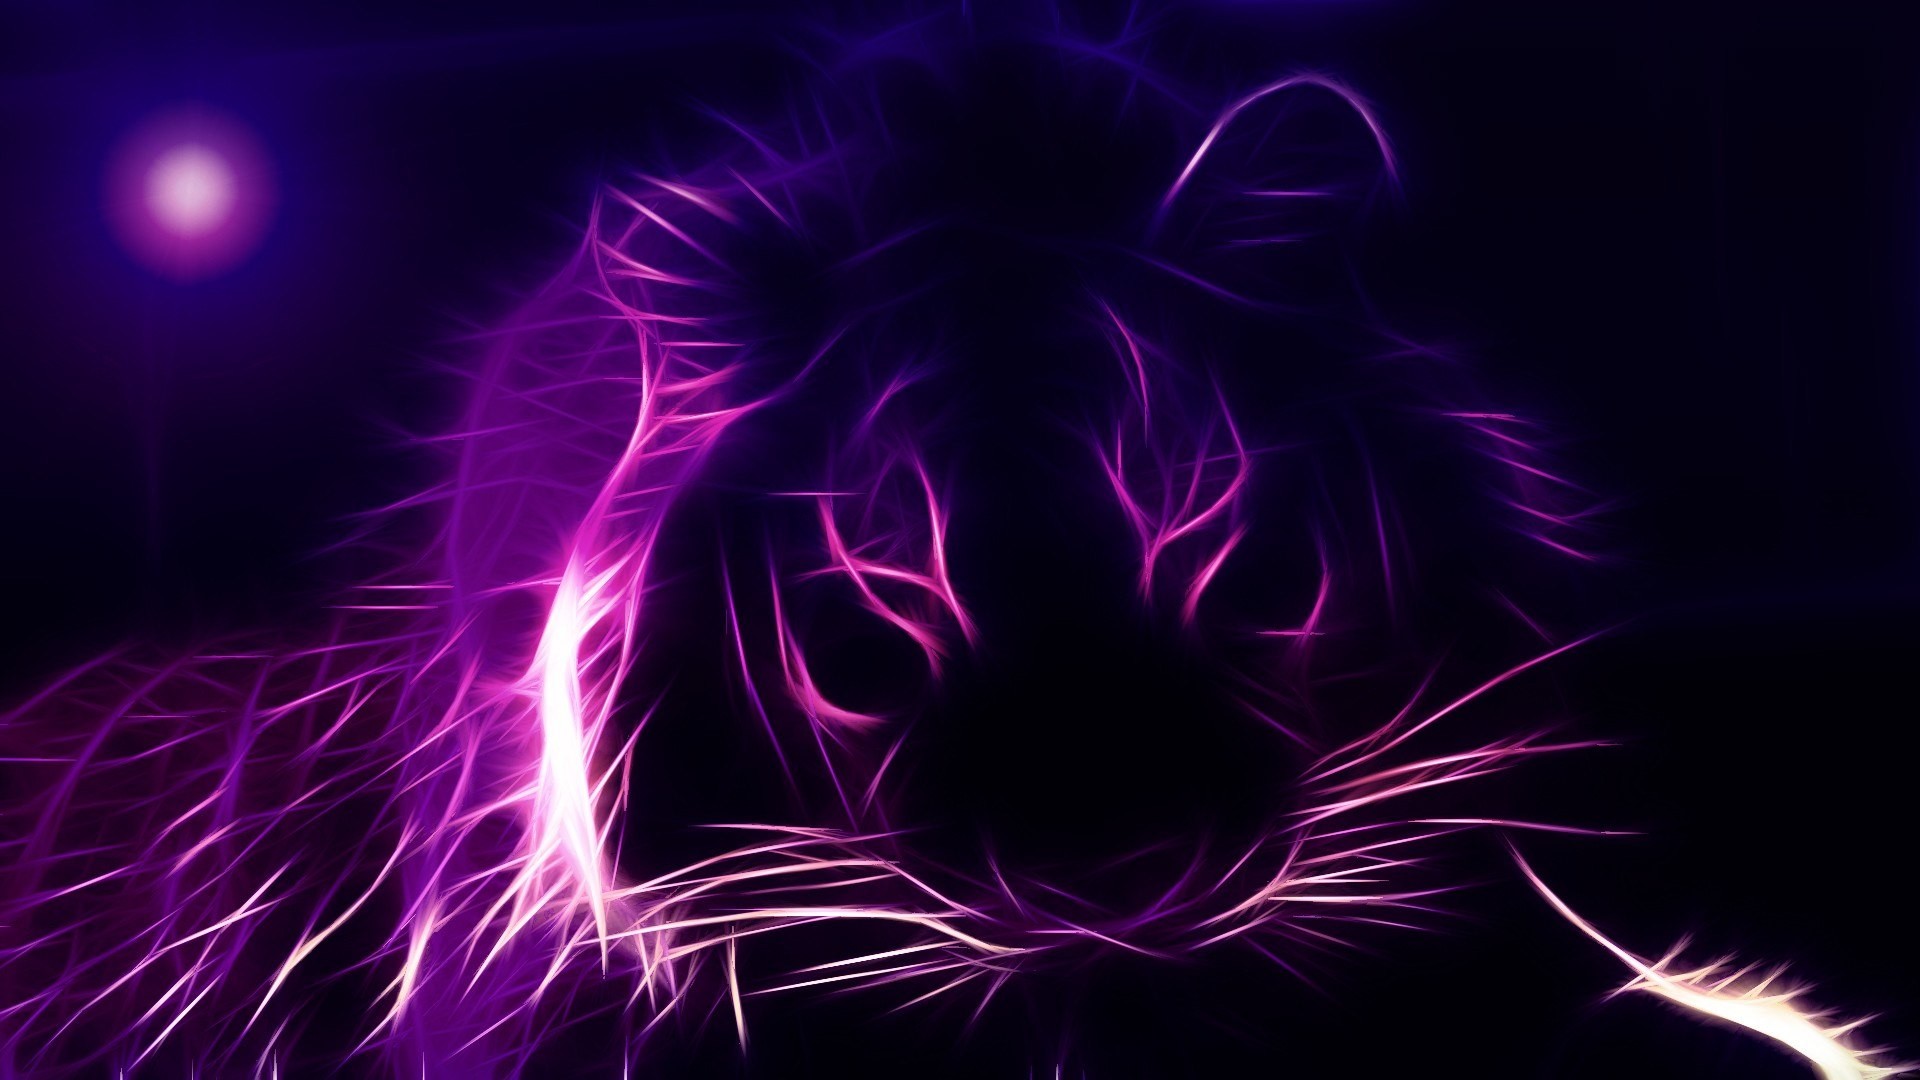 1920x1080 Amazing Free Blog Backgrounds To Download For Desktop  Cool Neon  Purple Backgrounds